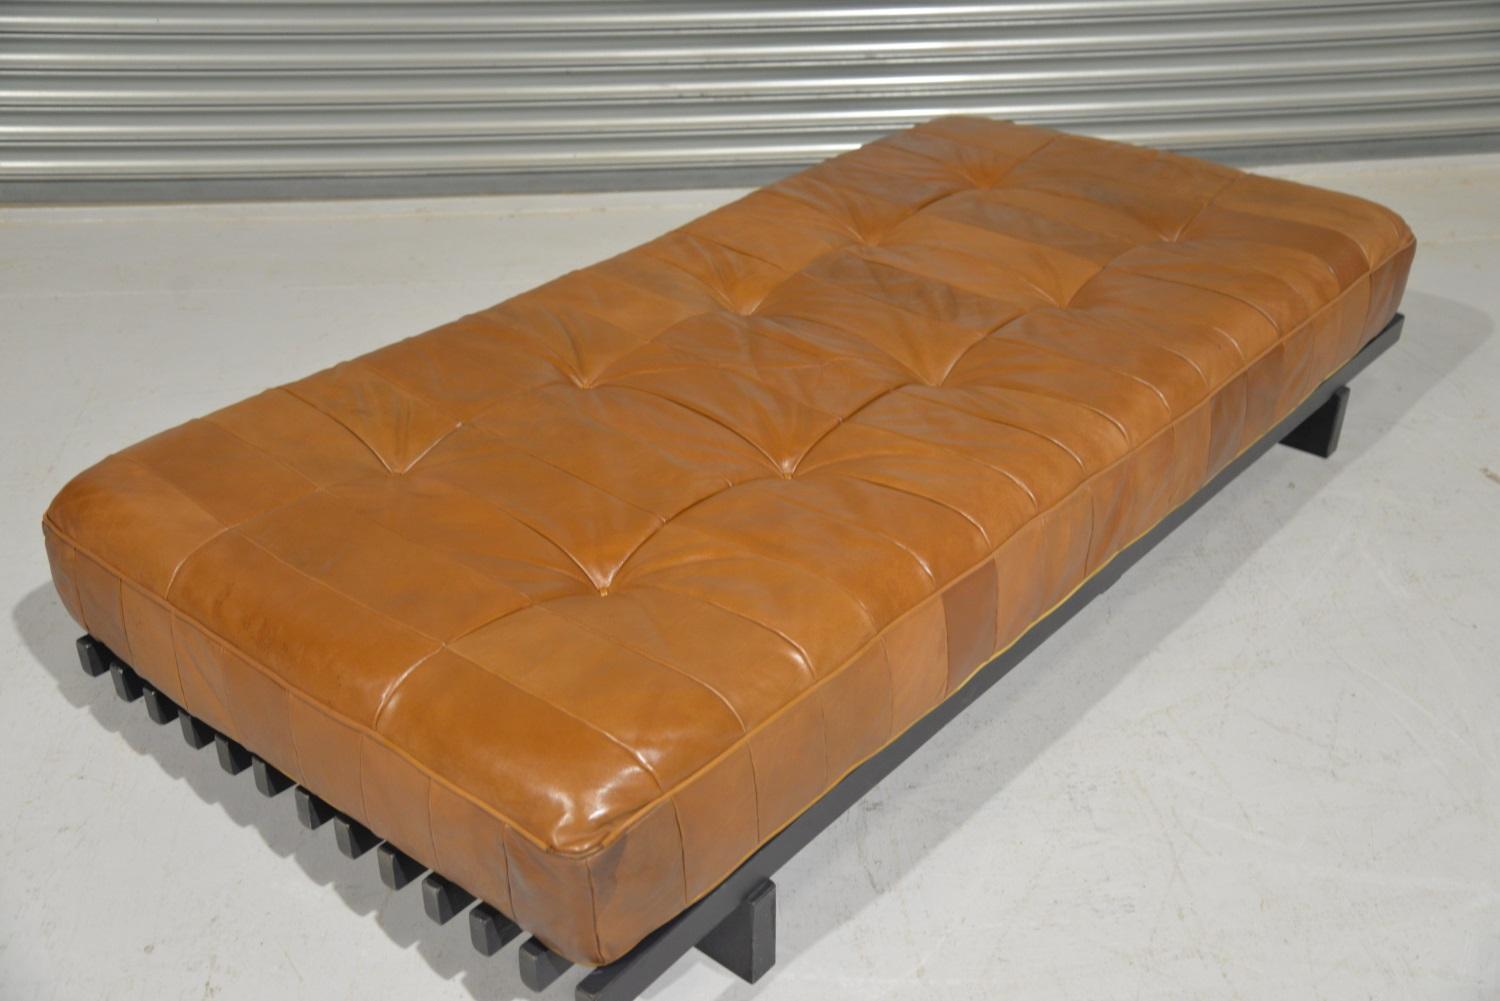 Vintage De Sede DS 80 Leather Patchwork Daybed, Switzerland, 1960s For Sale 4